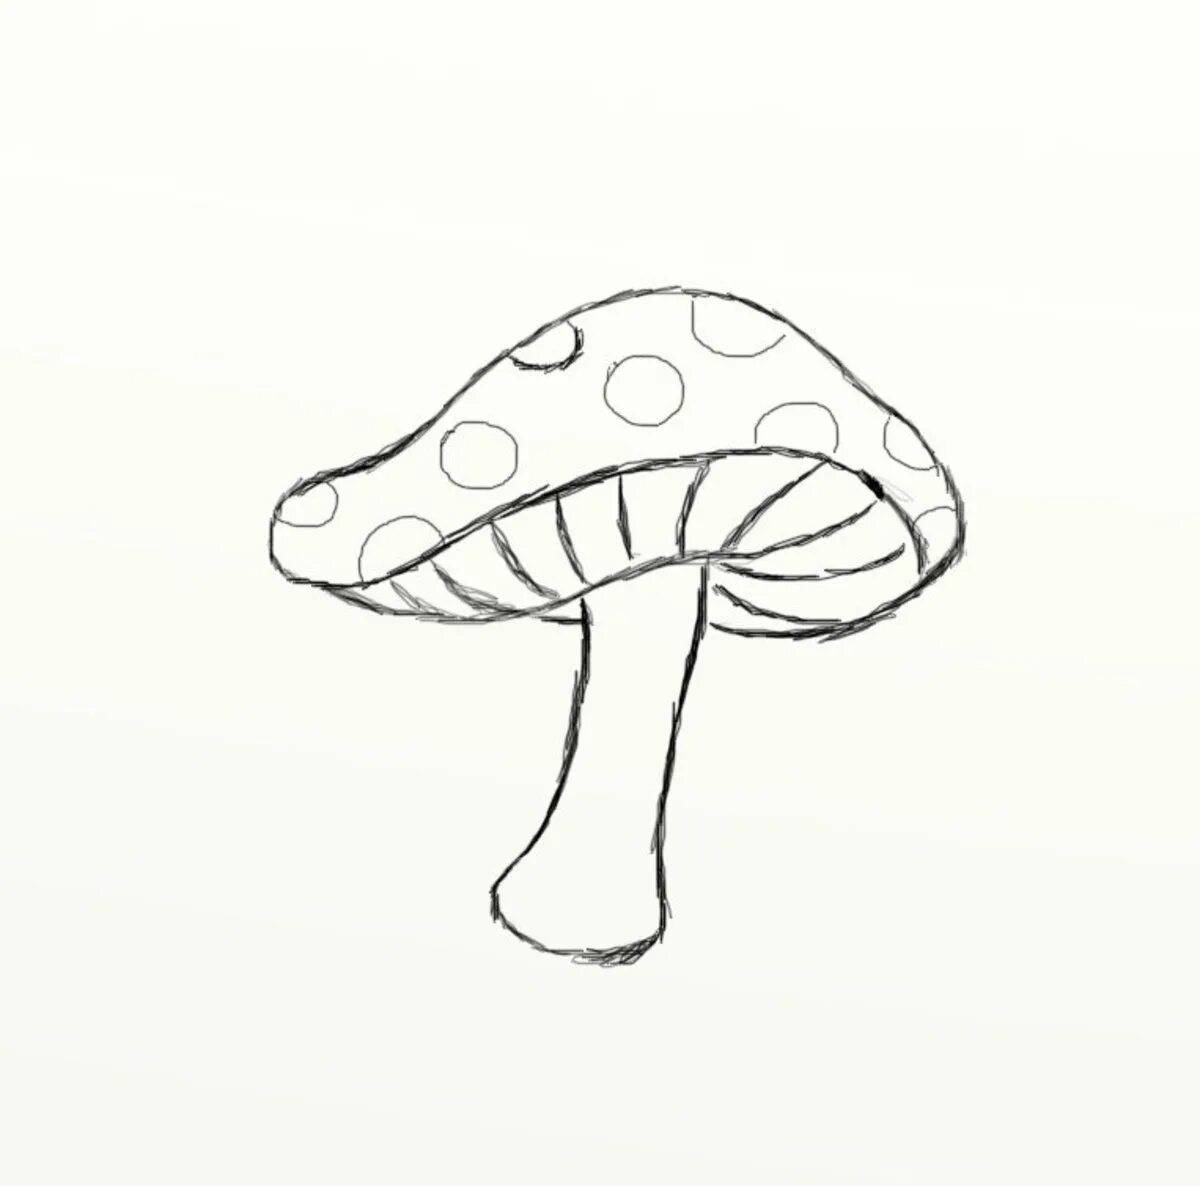 Sublime coloring page мухомор эстетика